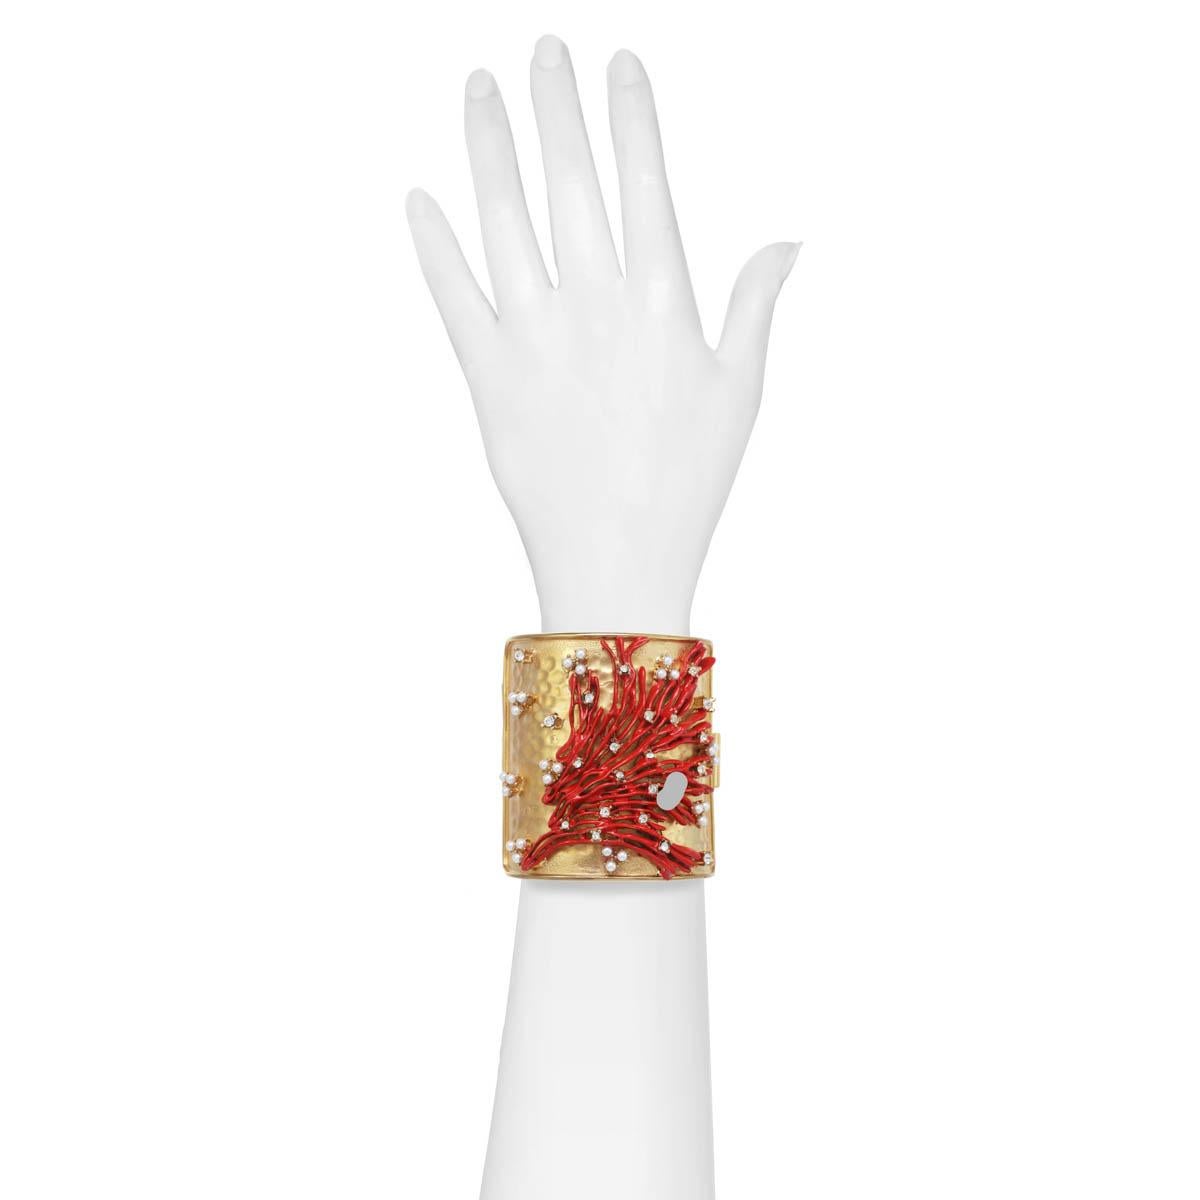 Living Gold, Red & Pearl! 
“Laguna” is an Italian name meaning “A body of water cut off from a larger body by a reef of sand or coral”, perfectly suited to this gorgeous statement cuff. This elegant statement piece looks gorgeous dressed down in the